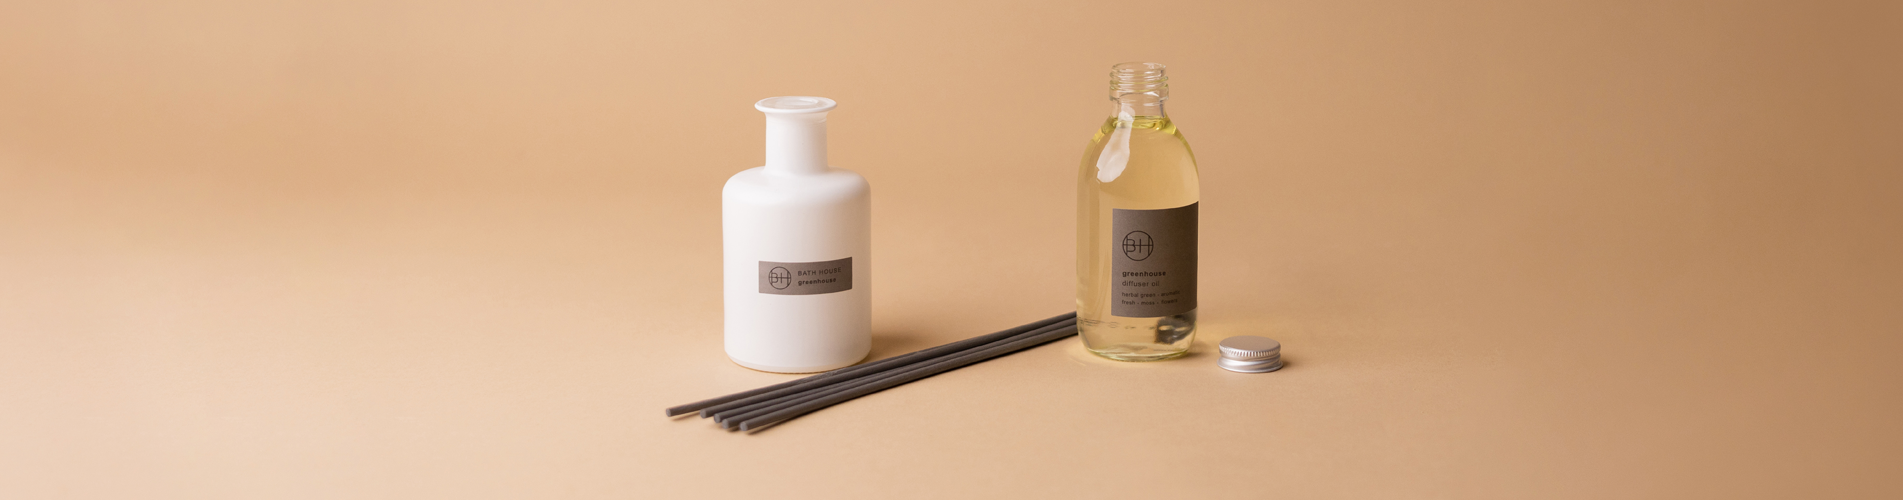 Banner Image Of The Room Diffuser Refills Product Category